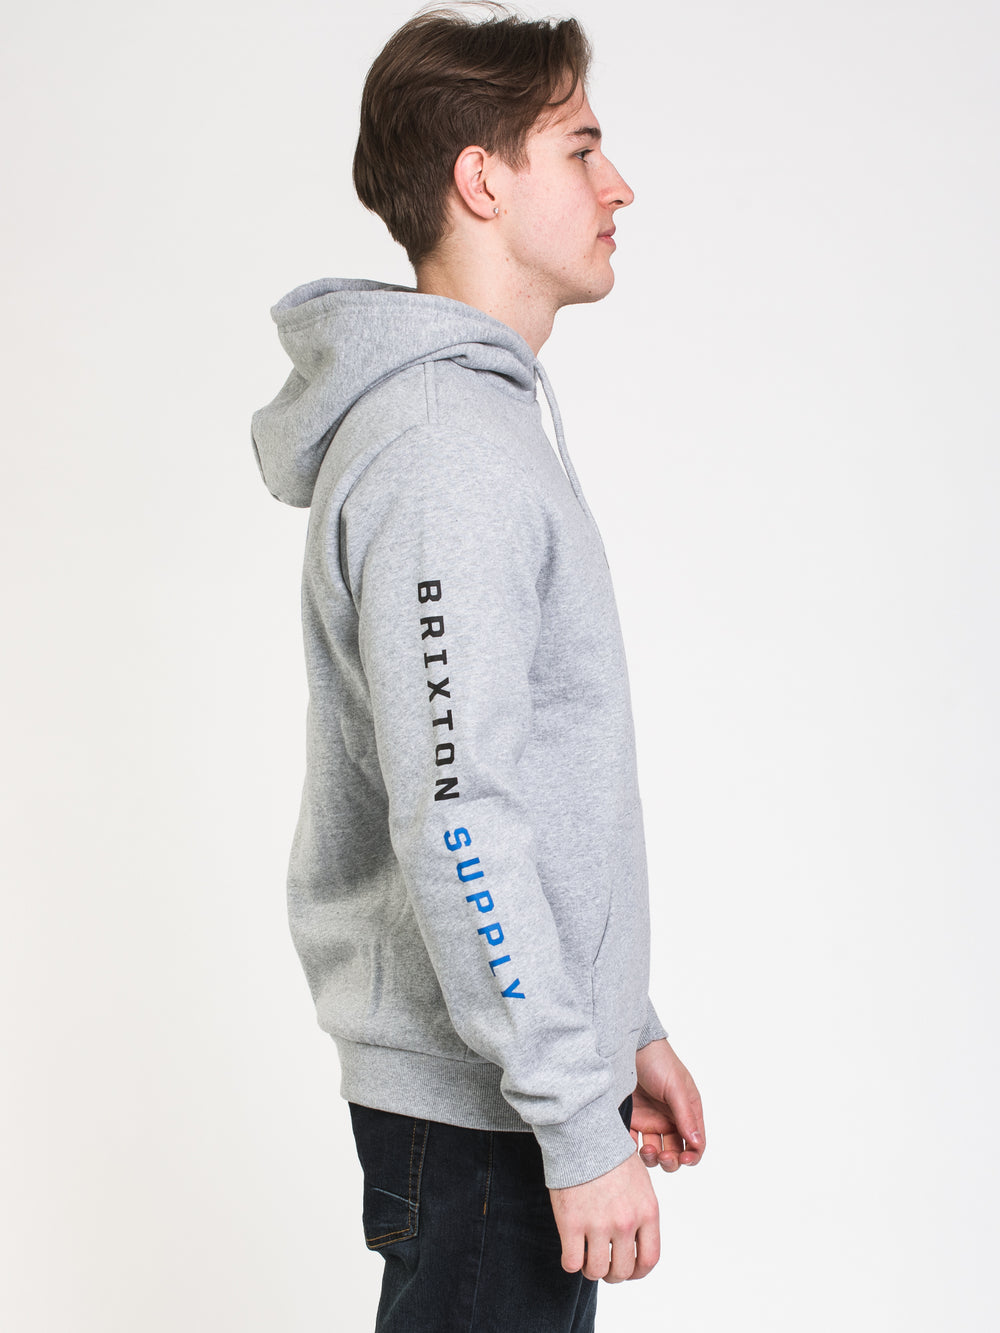 BRIXTON CREST PULLOVER HOODIE  - CLEARANCE